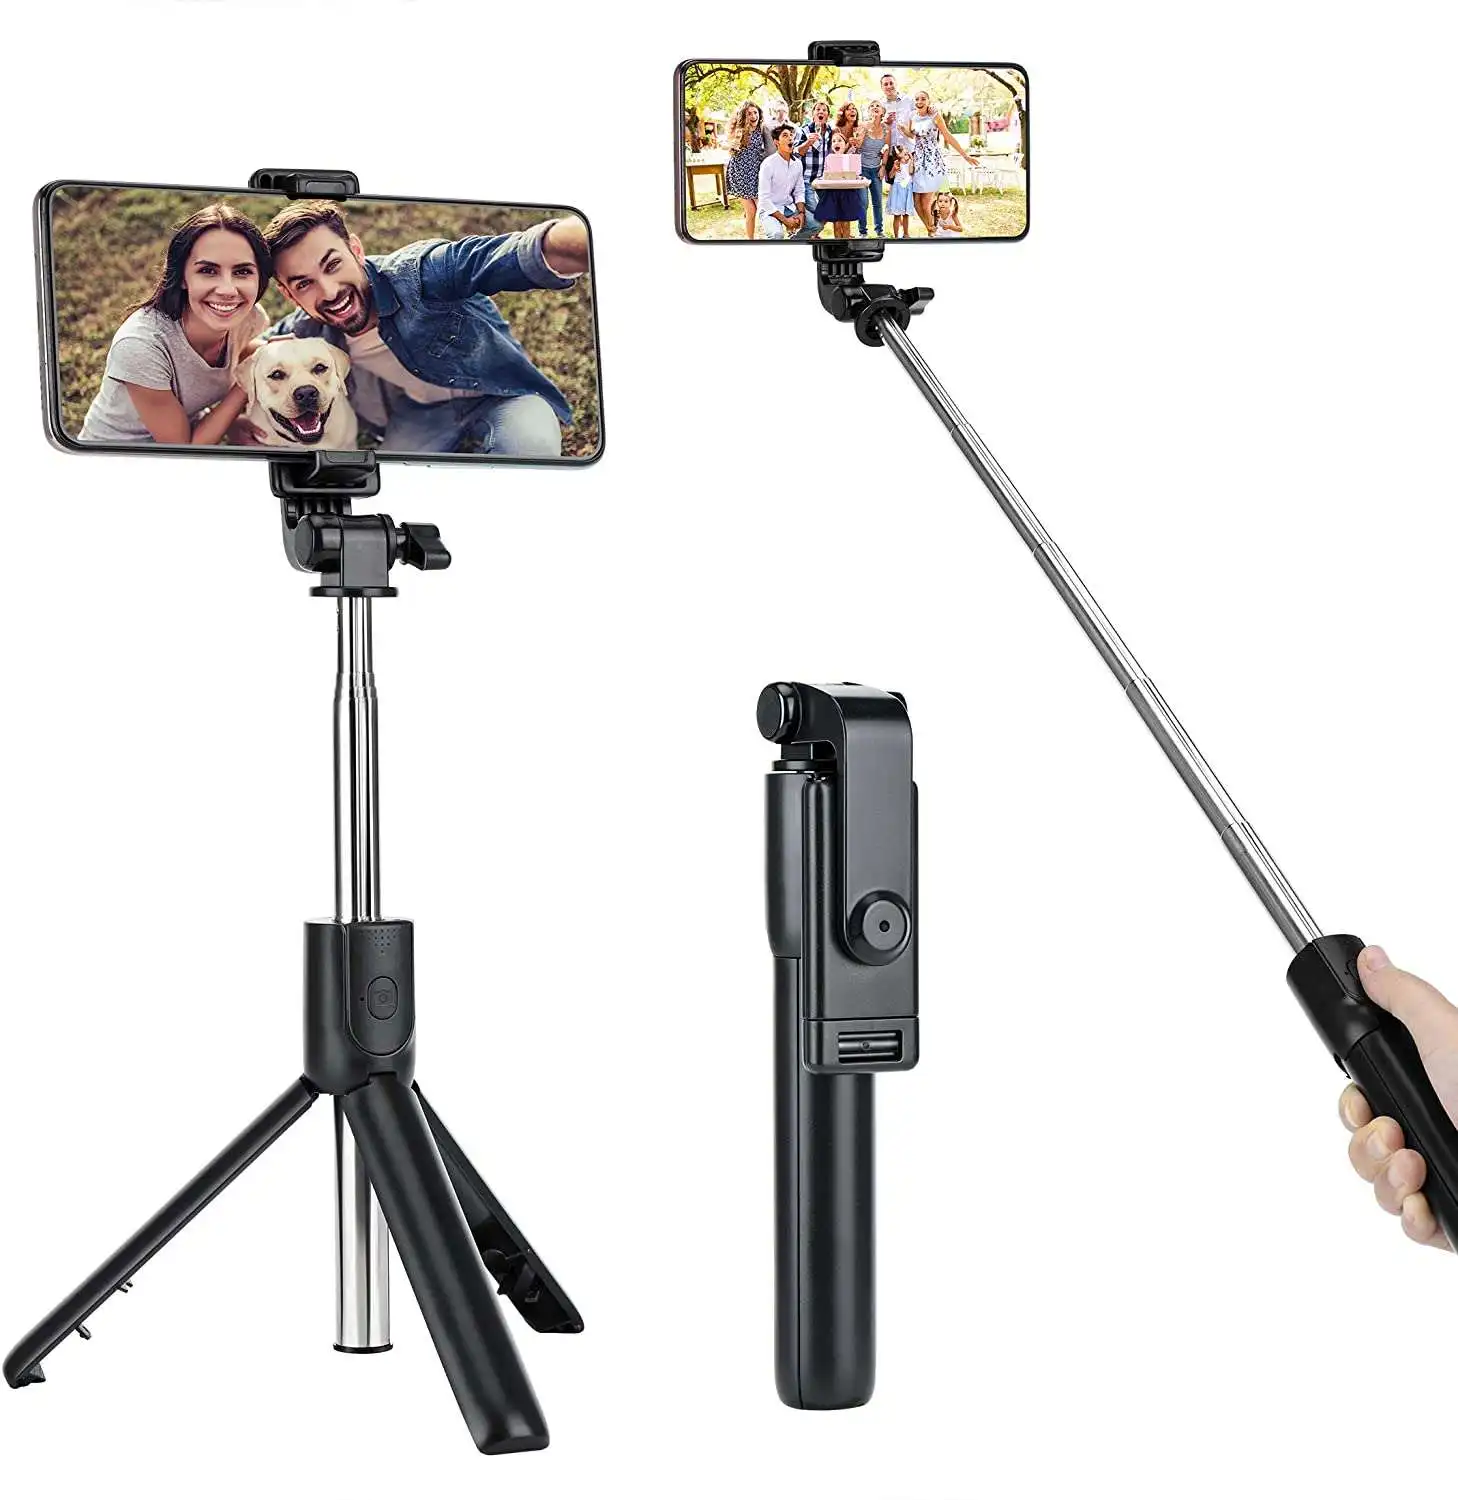 Wholesale Cheapest 3 1 Remote Control Selfistik Selfie Stick with Tripod From m.alibaba.com